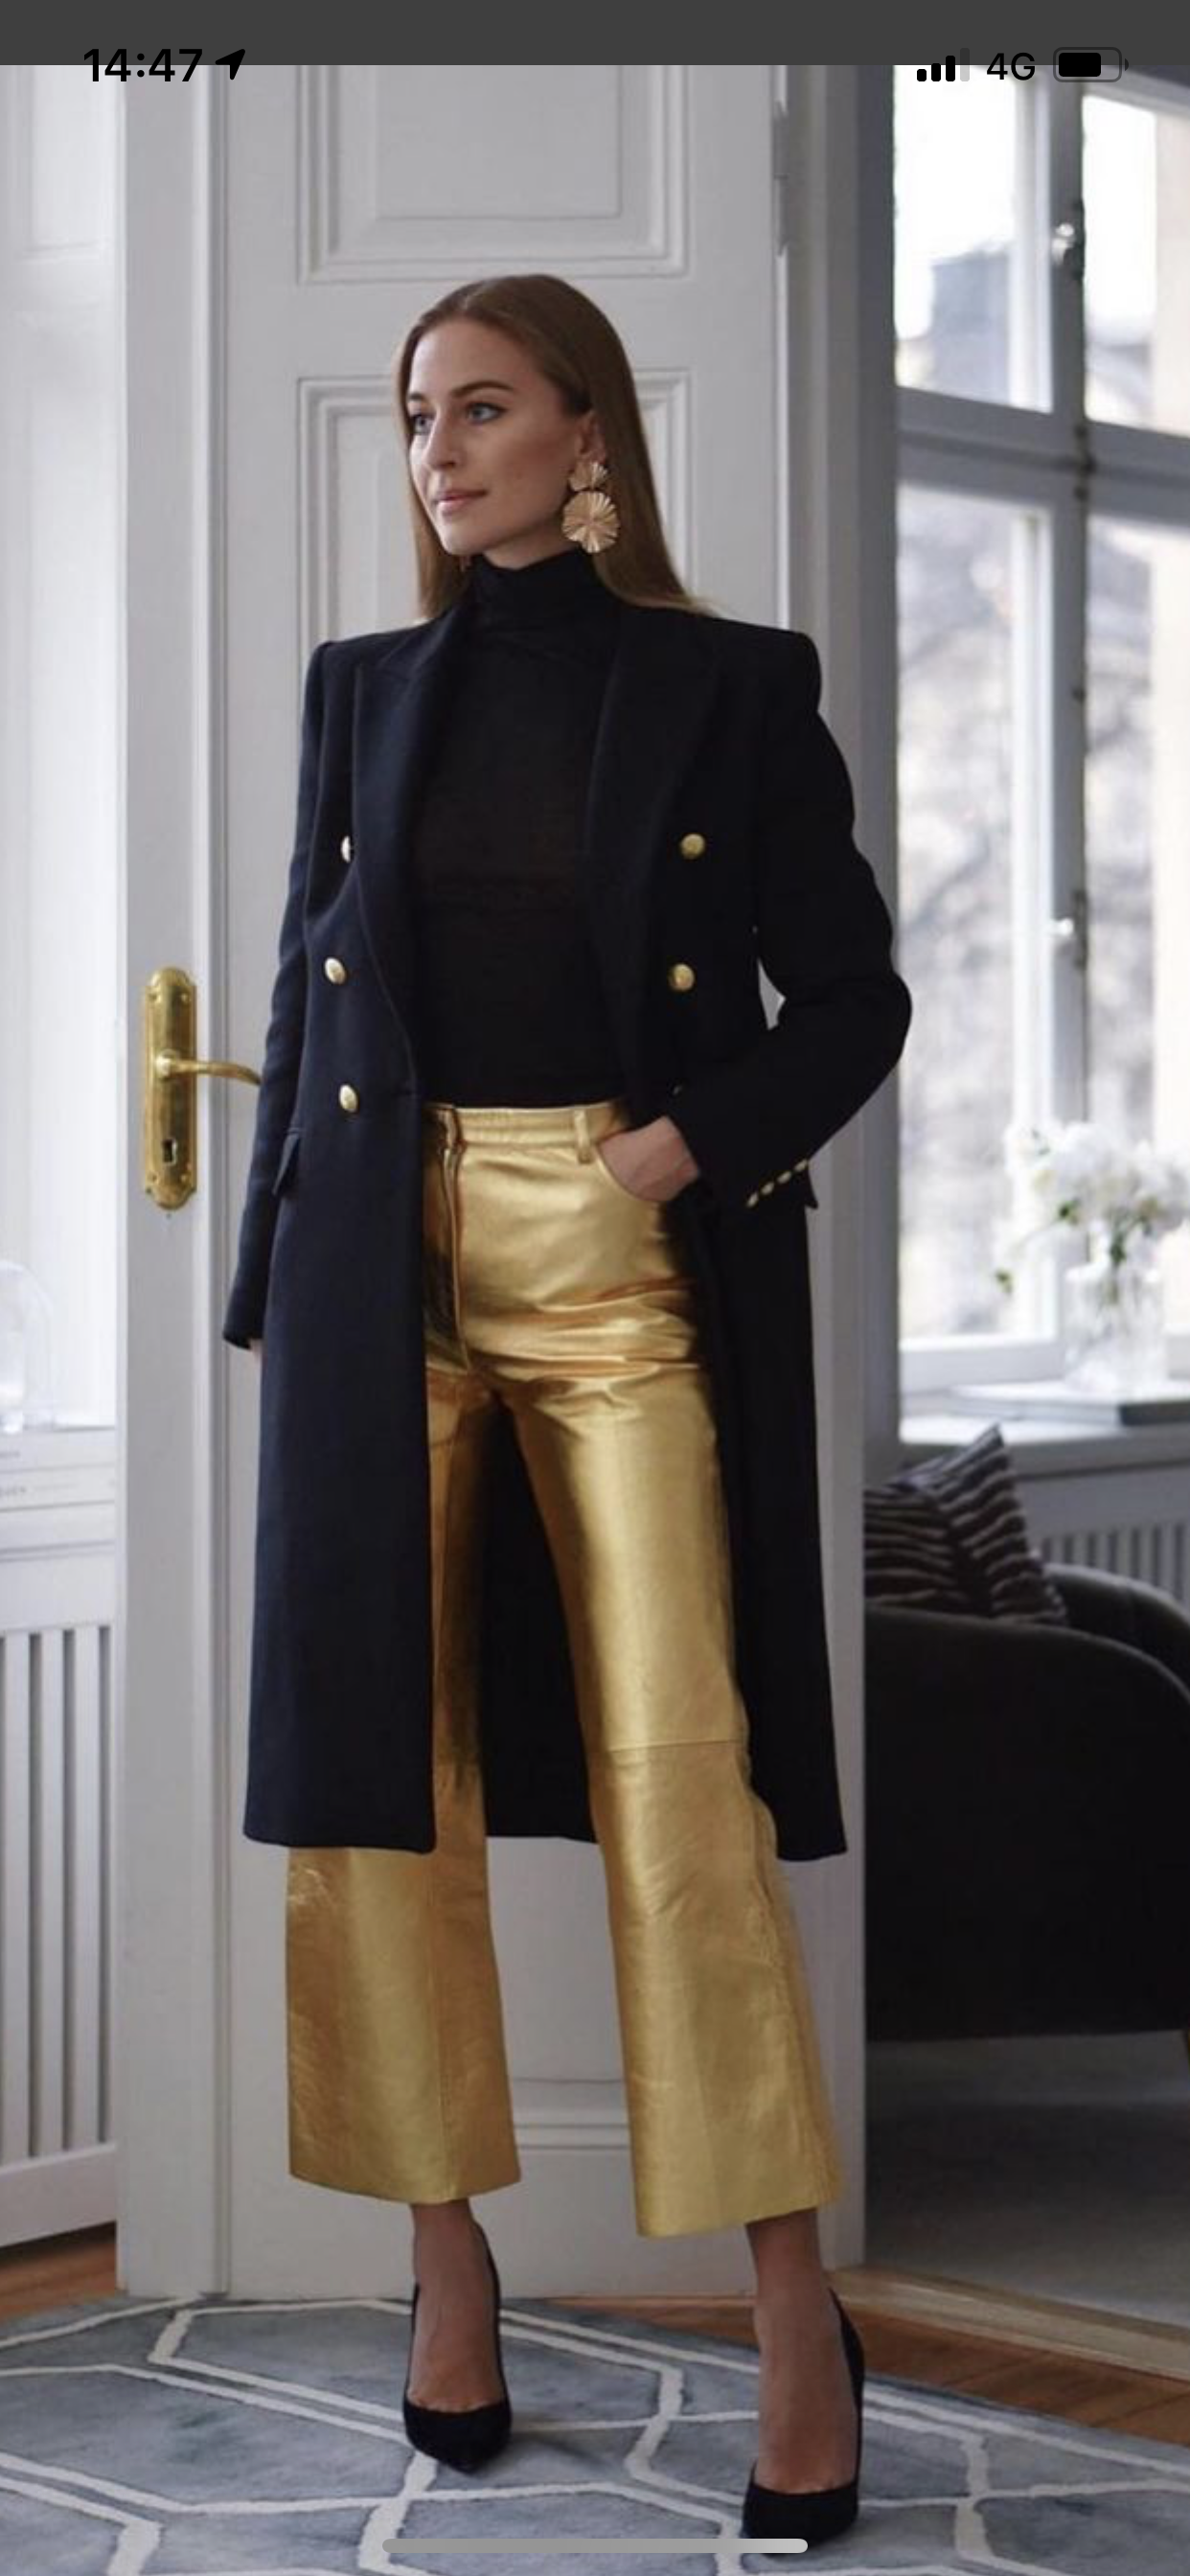 All that Glitters: The Rise of Gold Pants
in Fashion